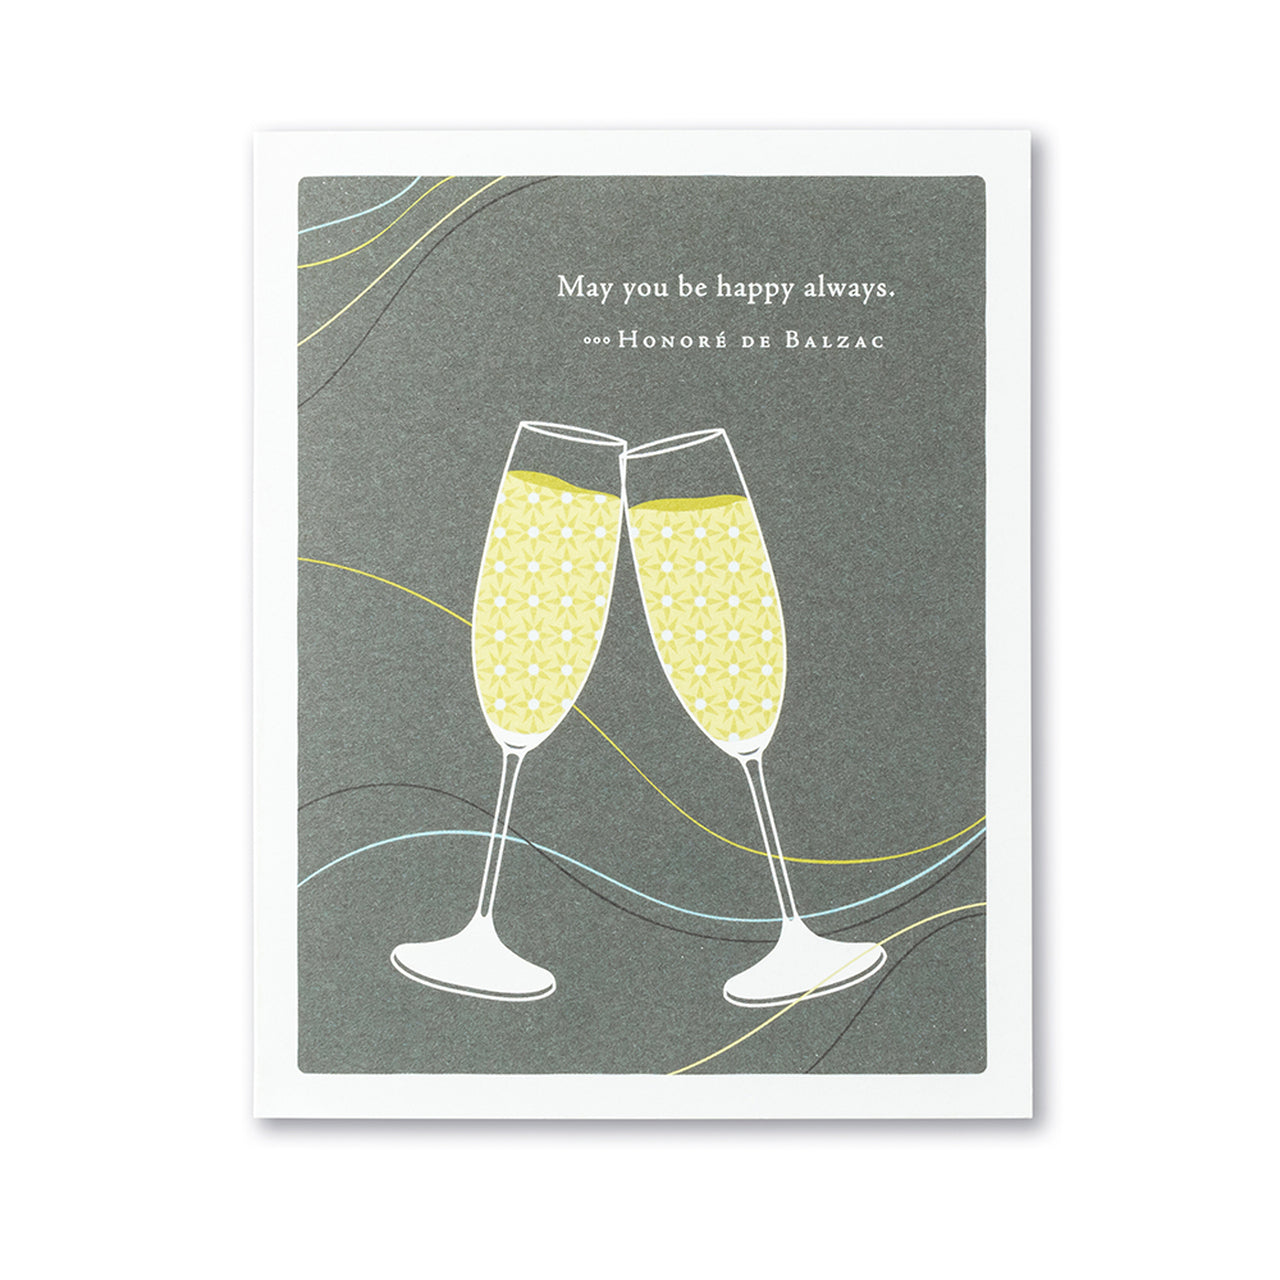 Positively Green Greeting Card - Wedding - "May You Be Happy Always" - Honore De Balzac - Mellow Monkey